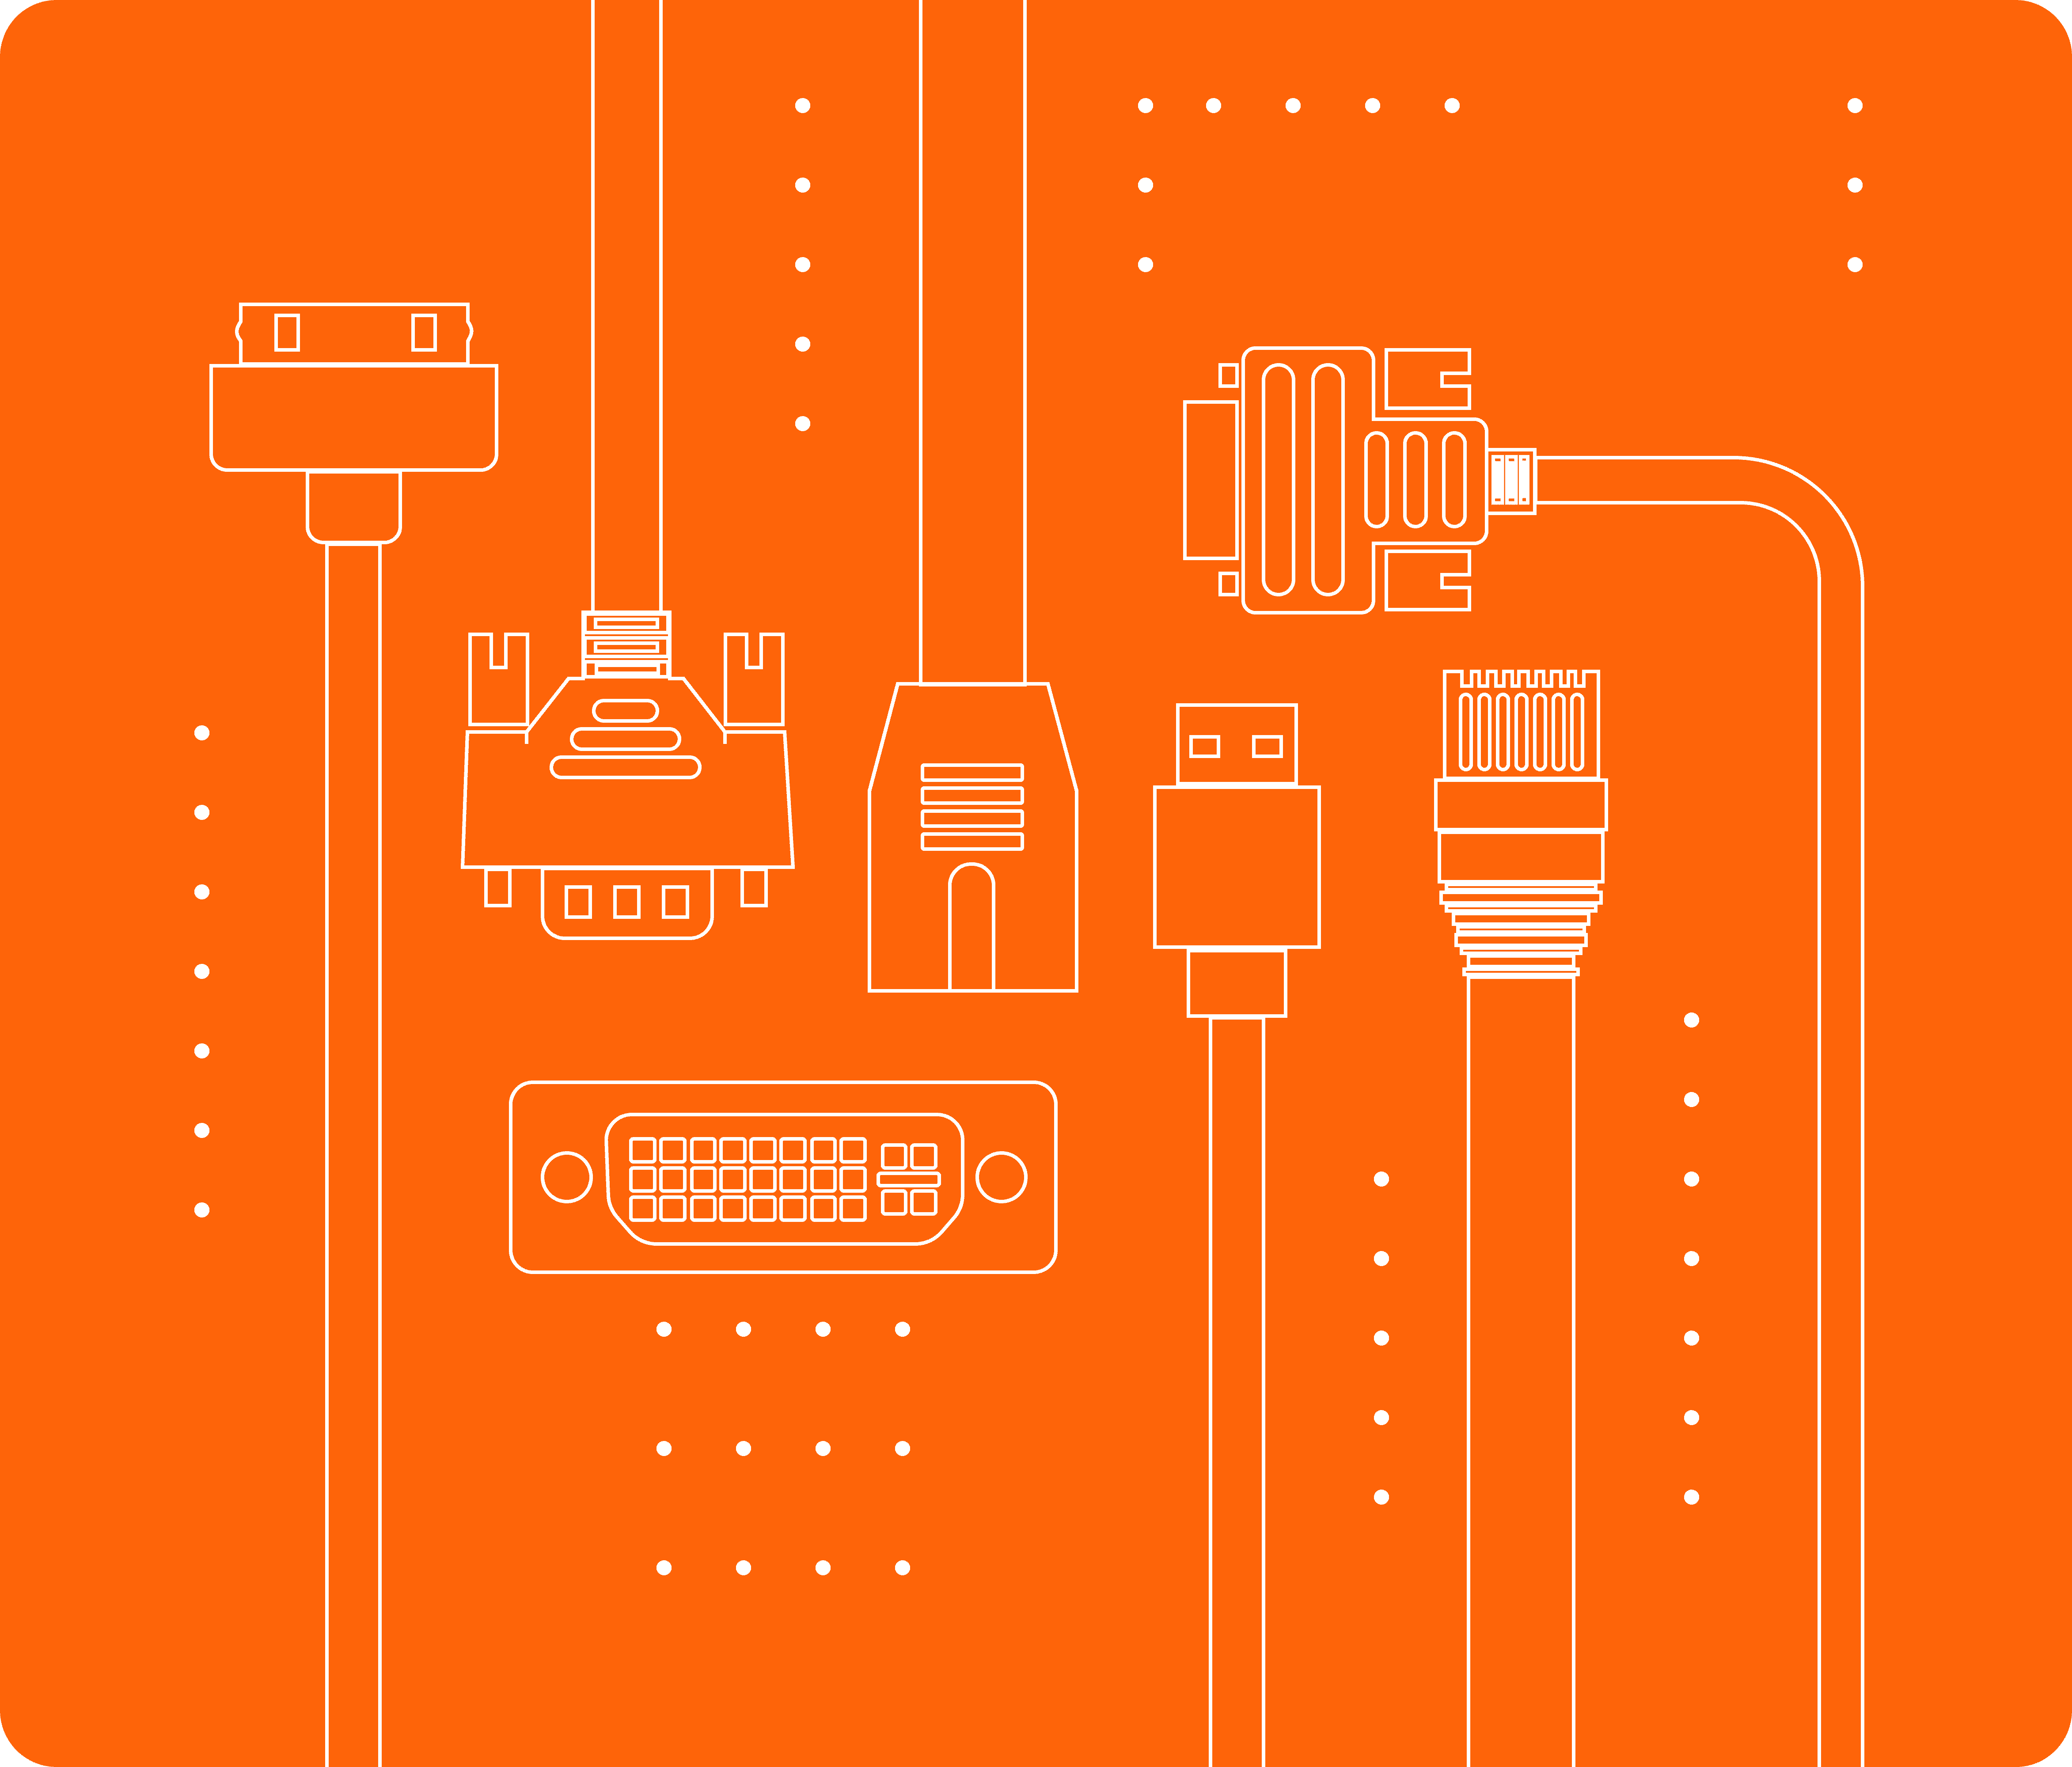 A line drawing of various computer connectors, including USB, HDMI, Ethernet, and power connectors.